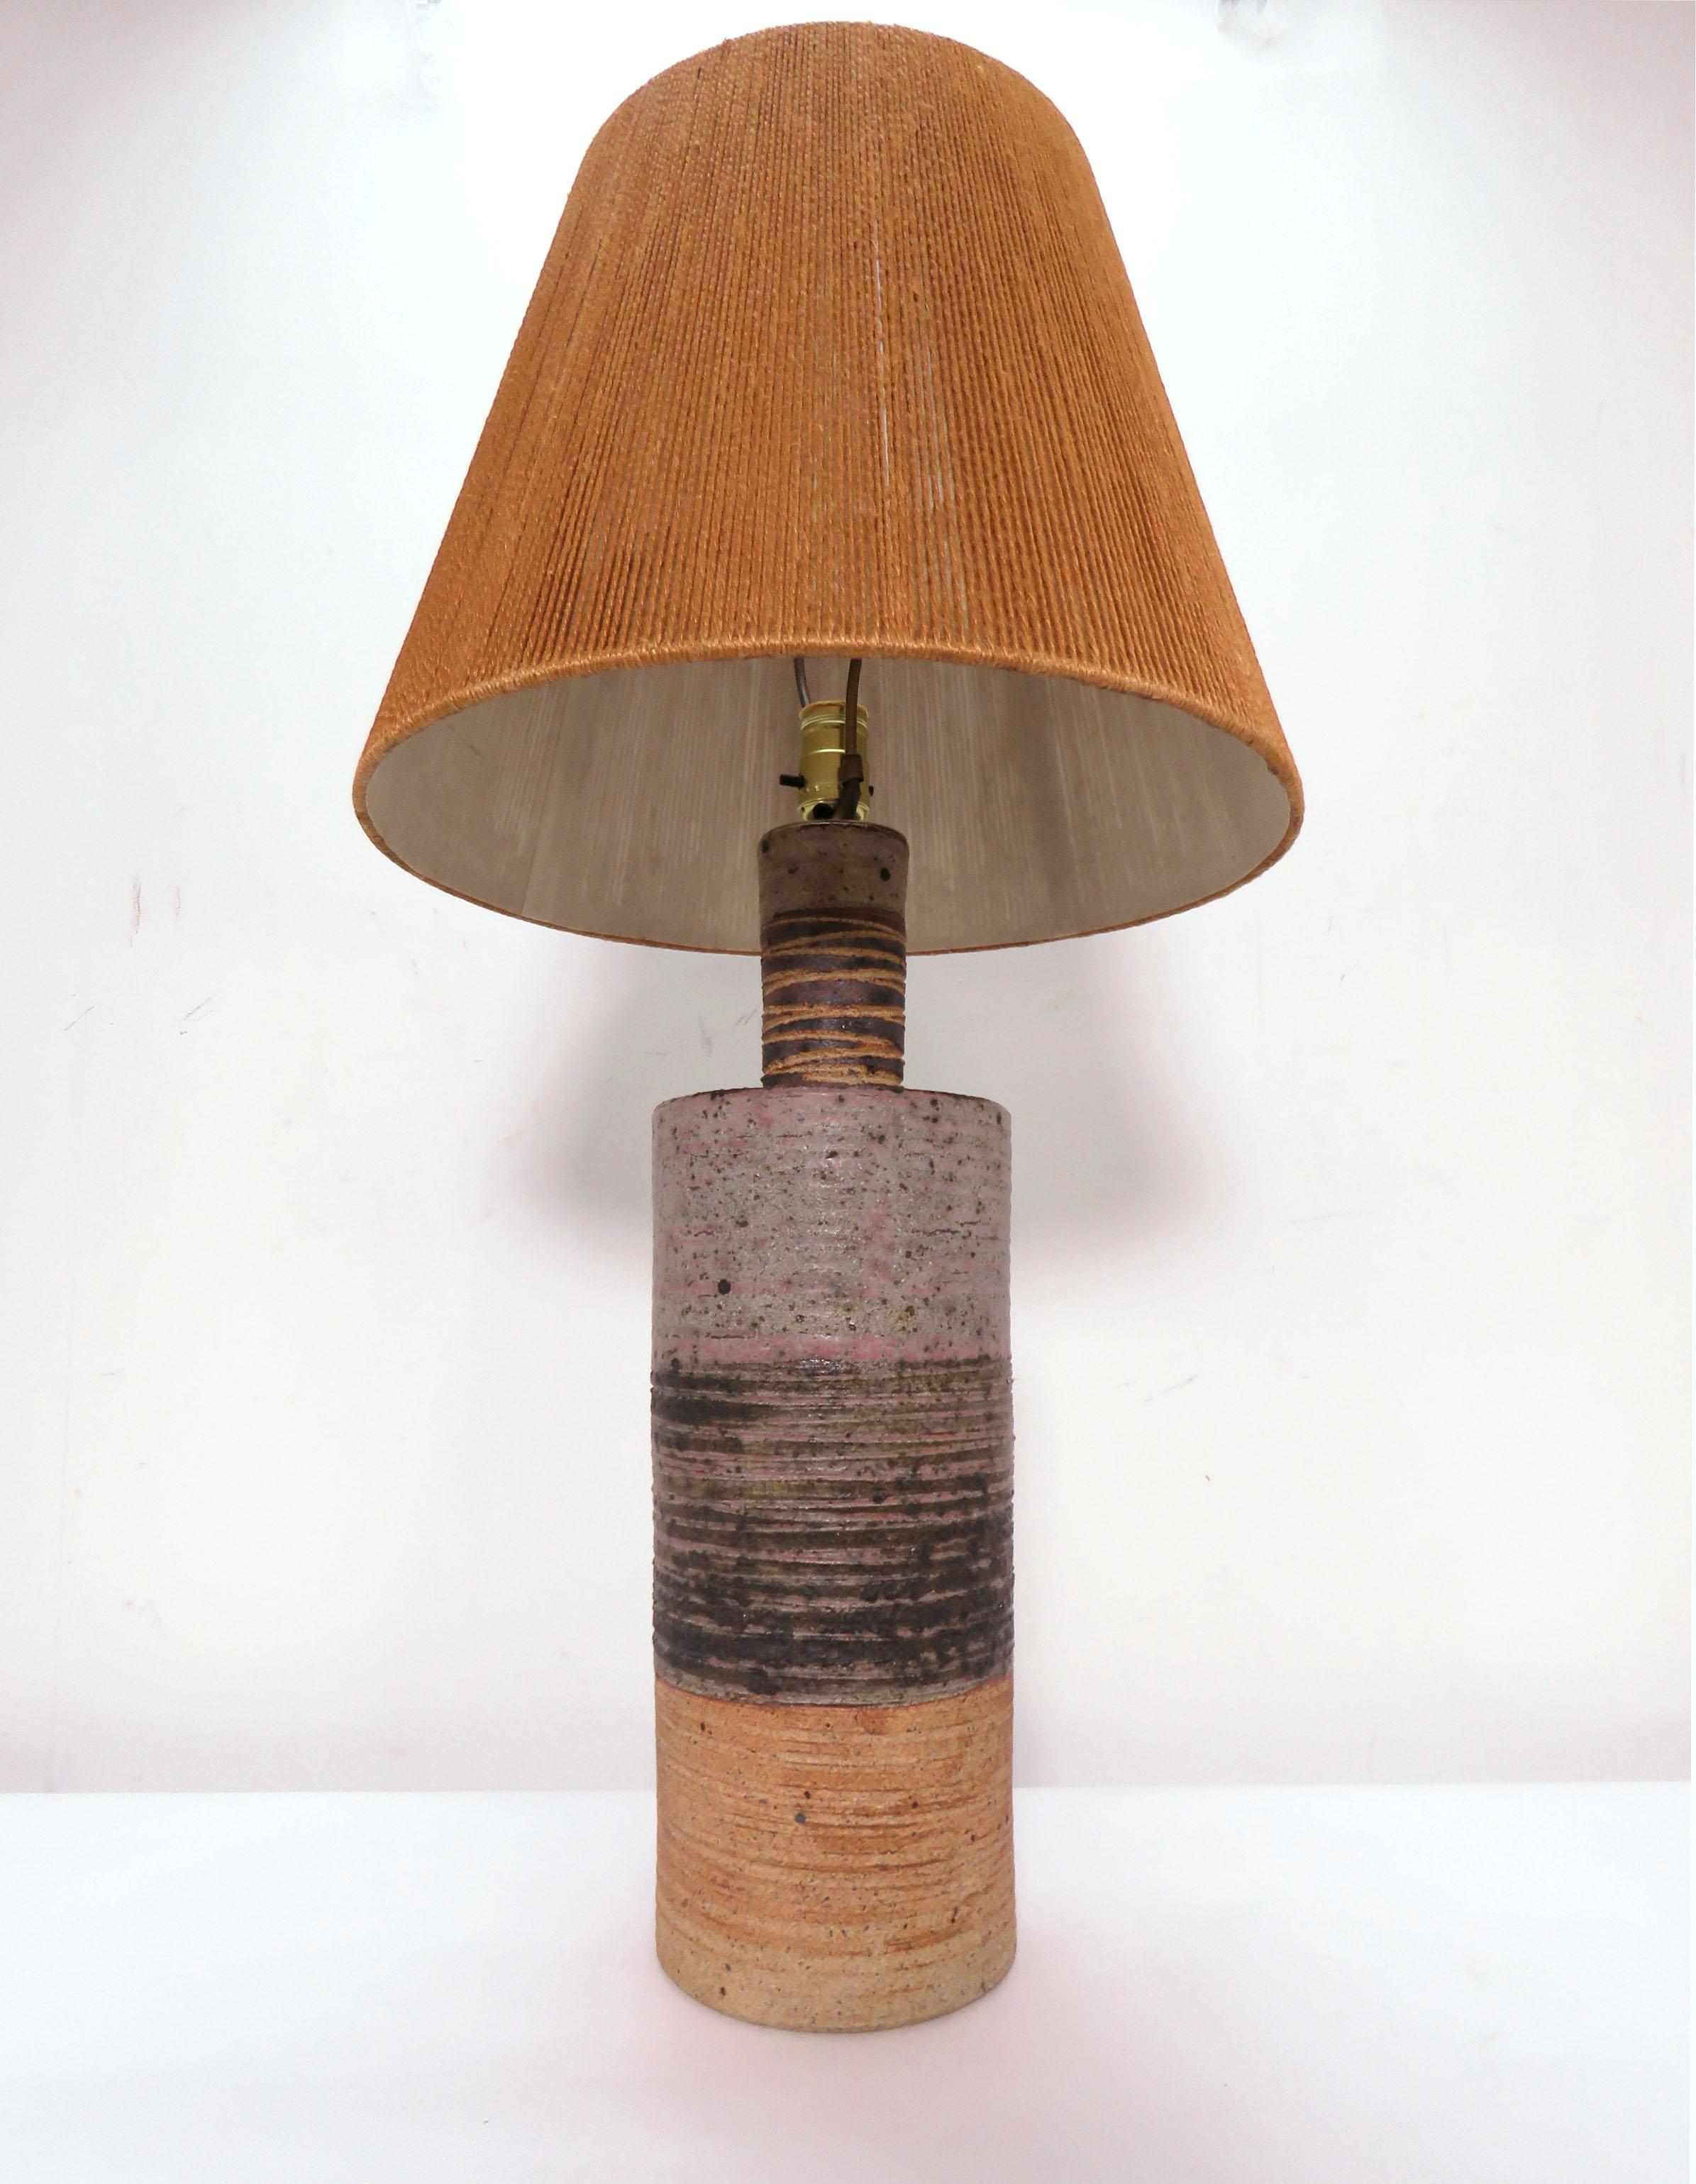 Studio pottery table lamp in glazed and incised stoneware by Tue Poulsen, Denmark, circa 1960s. 

Measures: 32